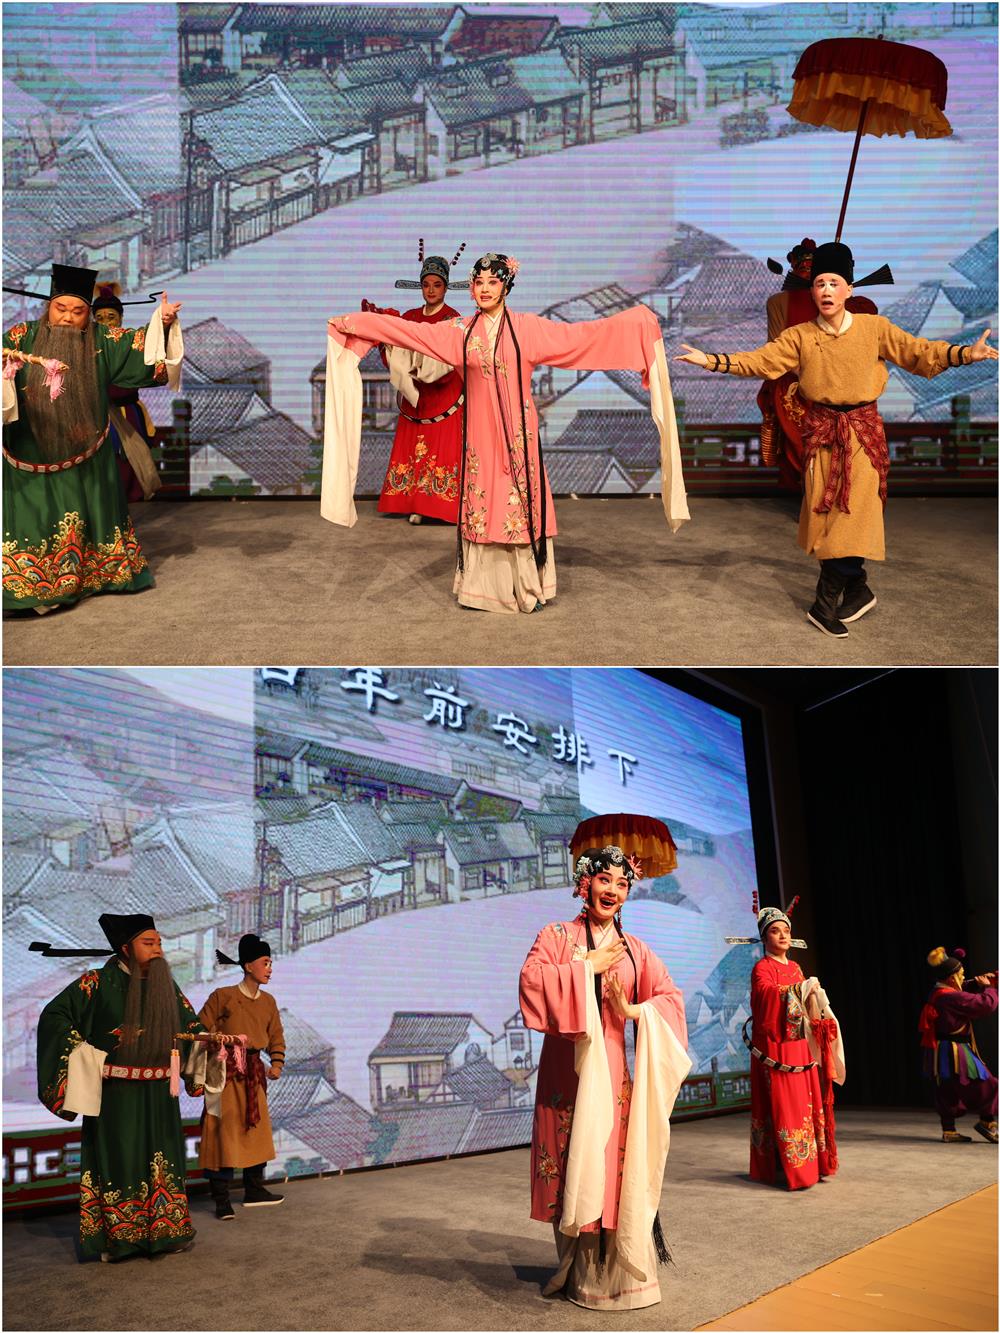 Opening the "Drama Comes from Wenzhou" Southern Opera Classic Culture Week, "China's First Drama" Comes to Shanghai Opera | Wenzhou | Culture